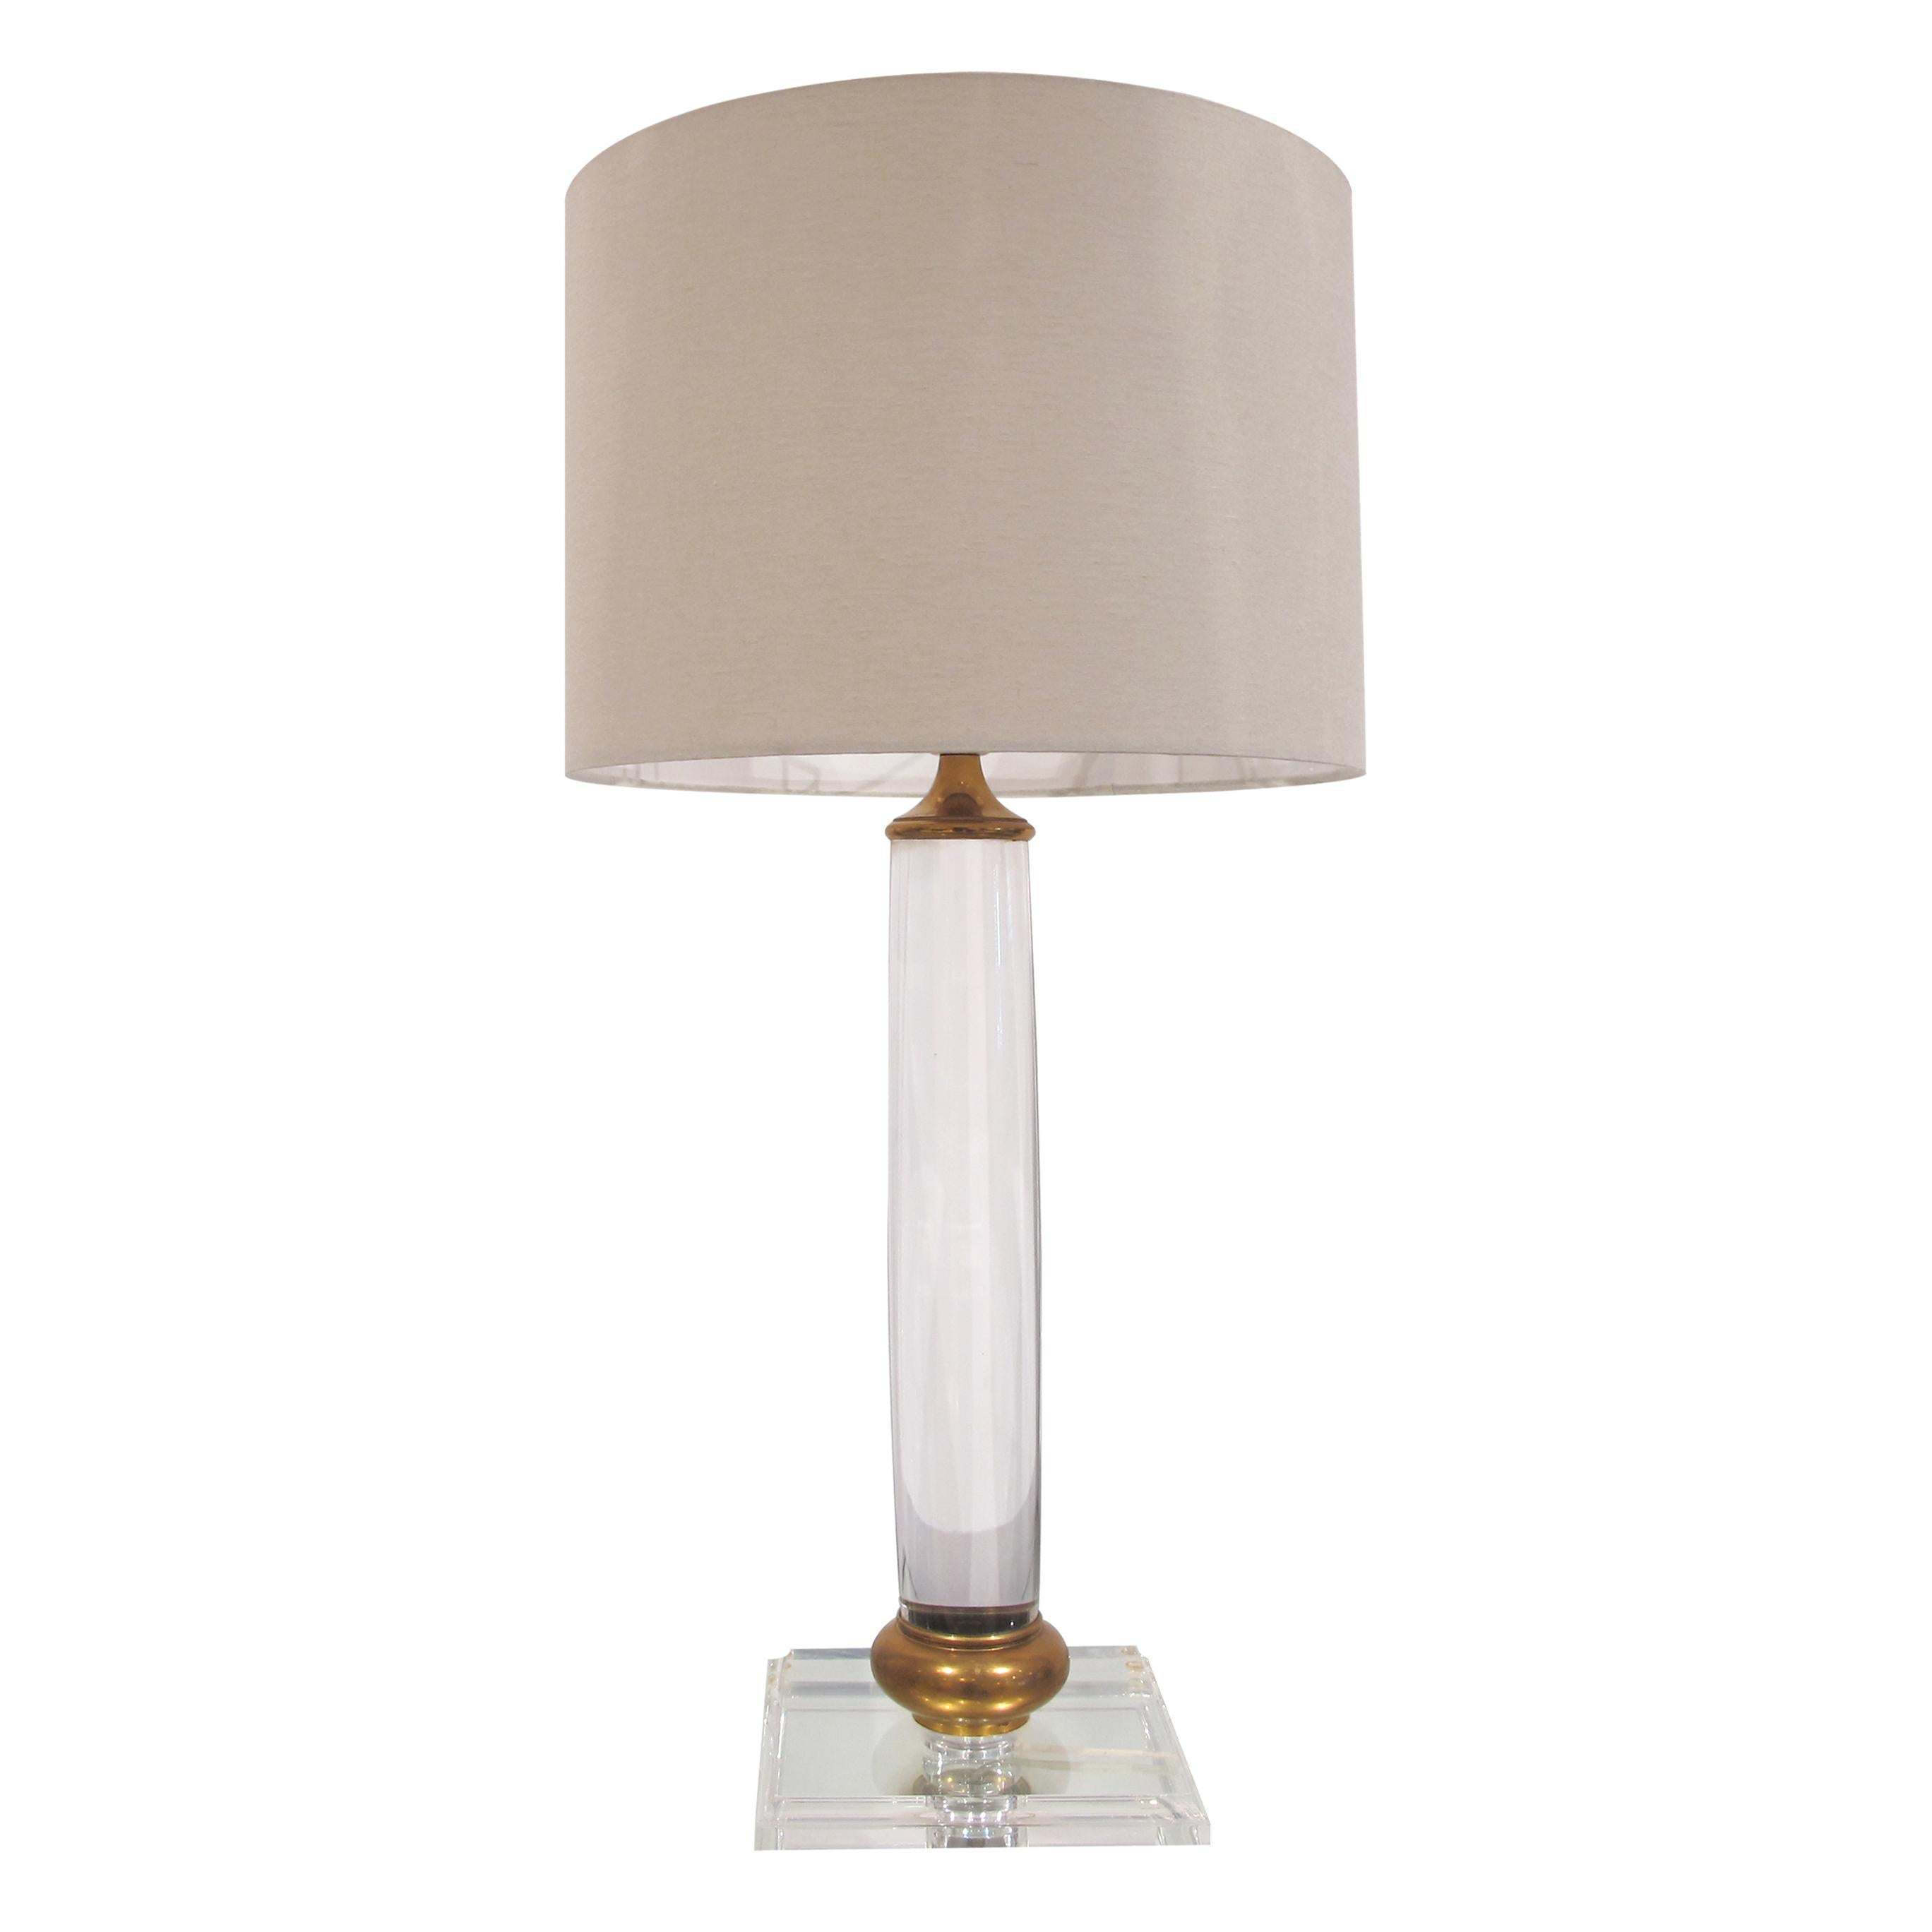 A stunning pair of tall Italian lucite/perspex table lamps mounted on a square base with a brass round trim at the base of the shaft. The lamps are of a simple elegant cylindrical design, the central brass stem is almost invisible due to the optical